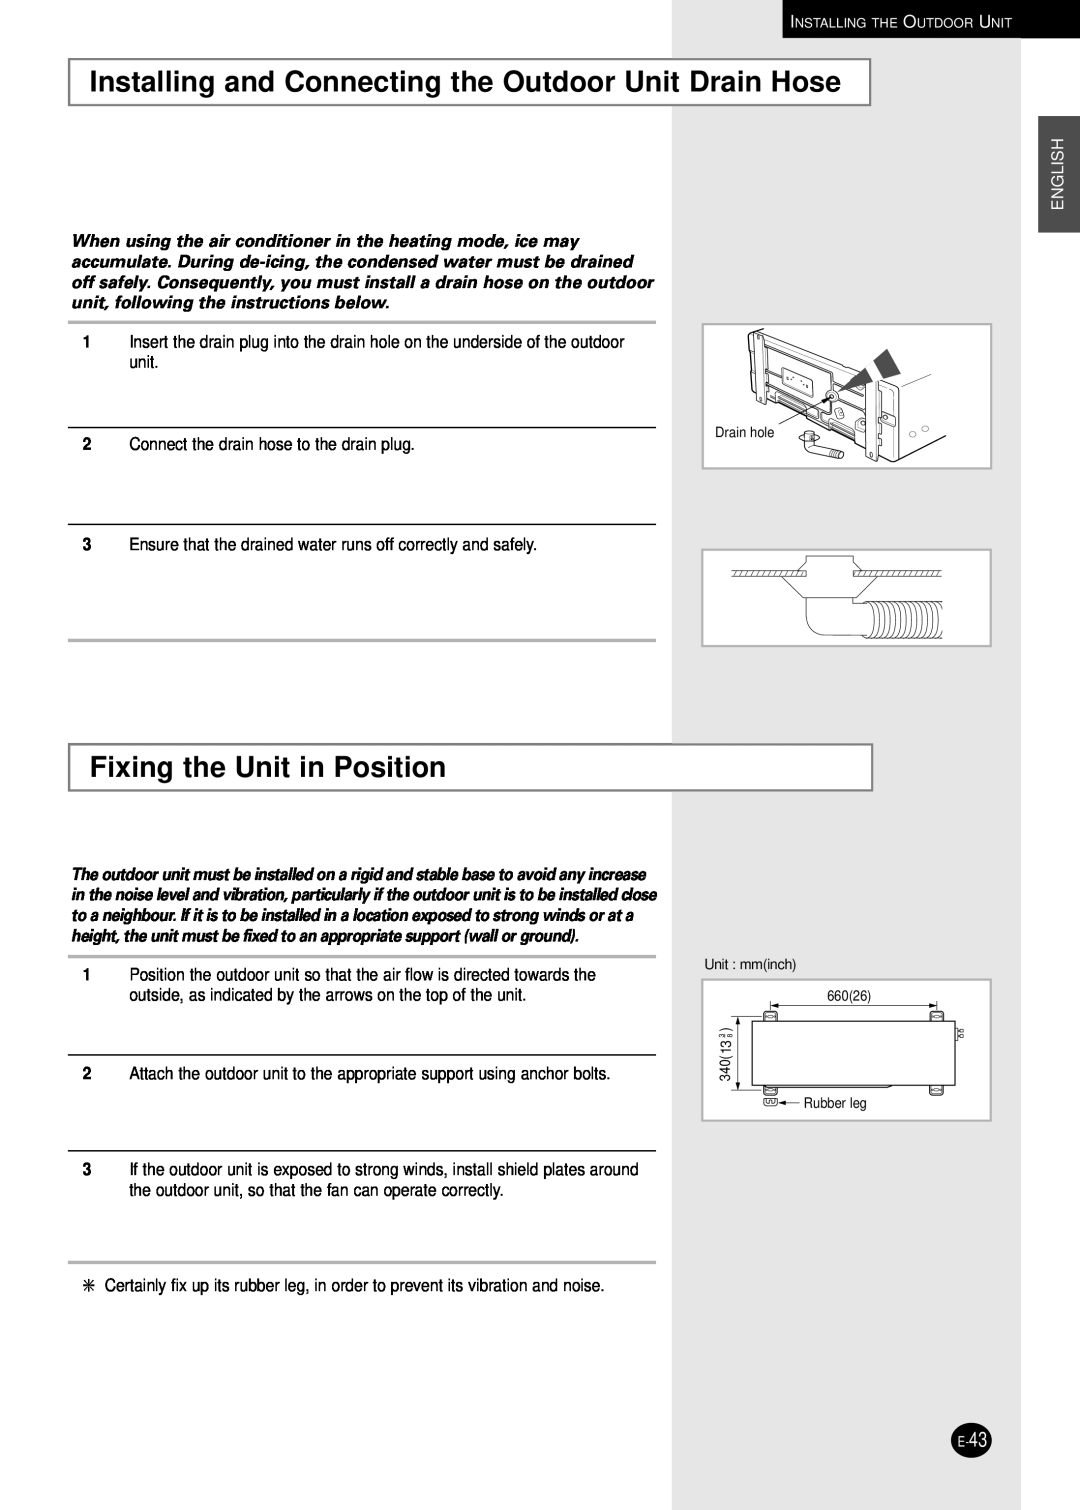 Samsung AD18B1C09 installation manual Fixing the Unit in Position, English 